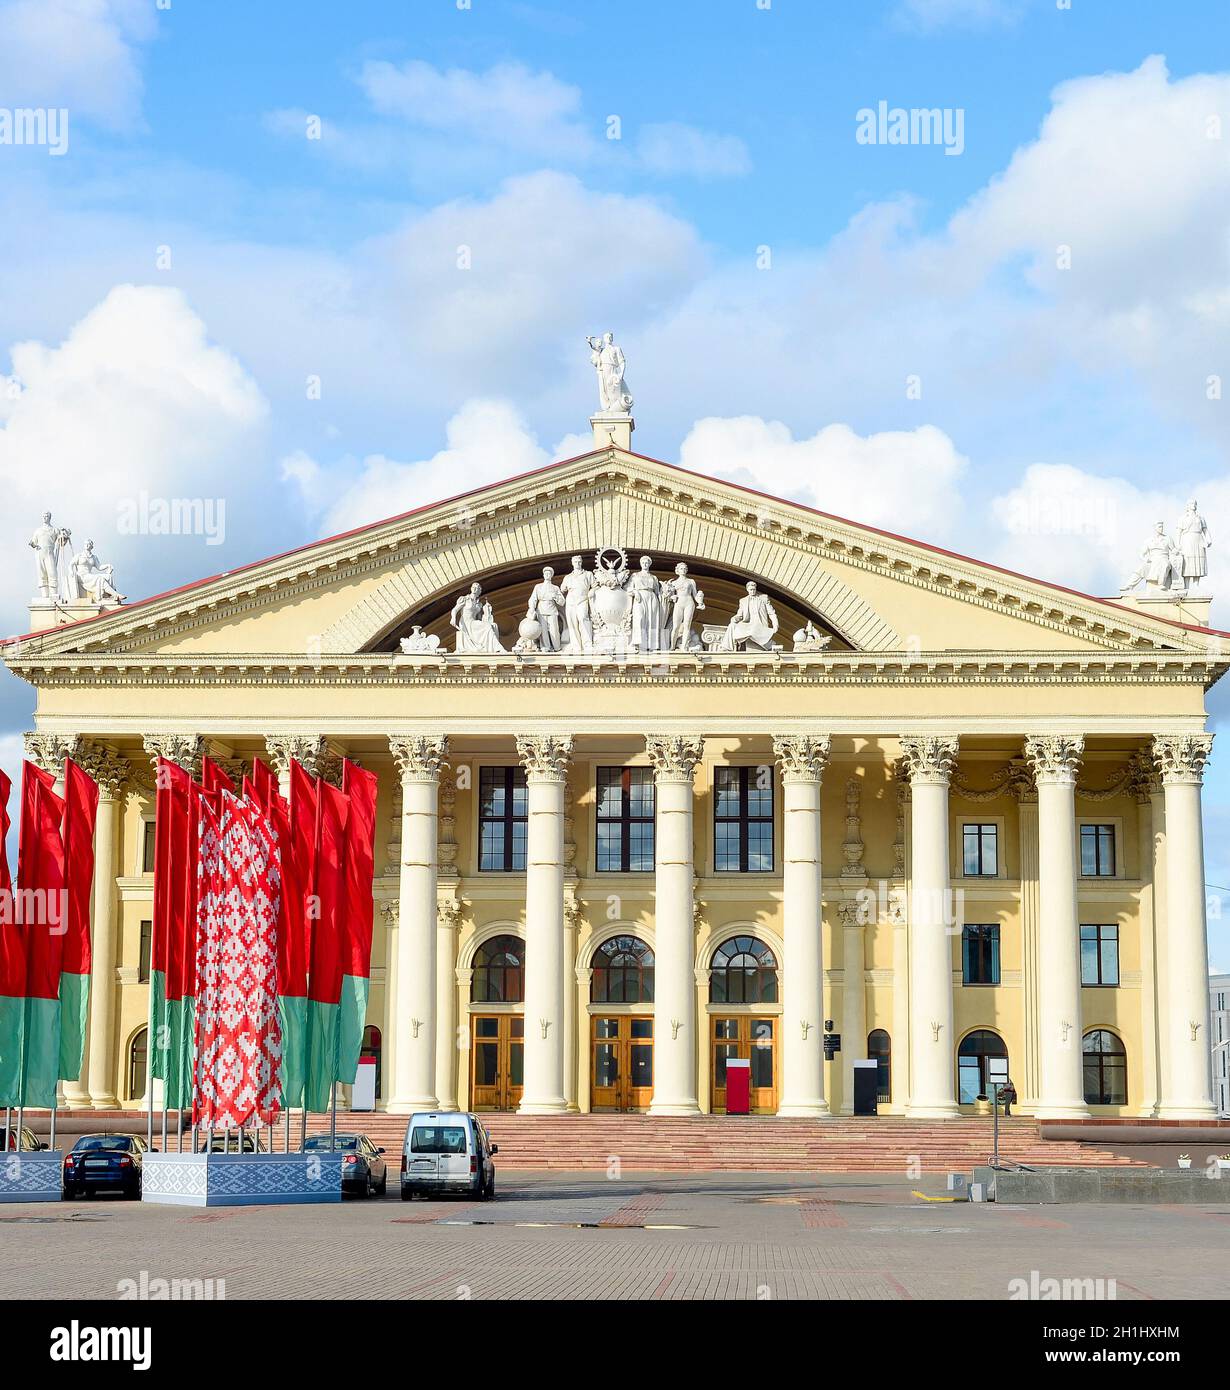 Labour Union Palace of Culture, waving national flags at central October Square, Minsk, Belarus Stock Photo